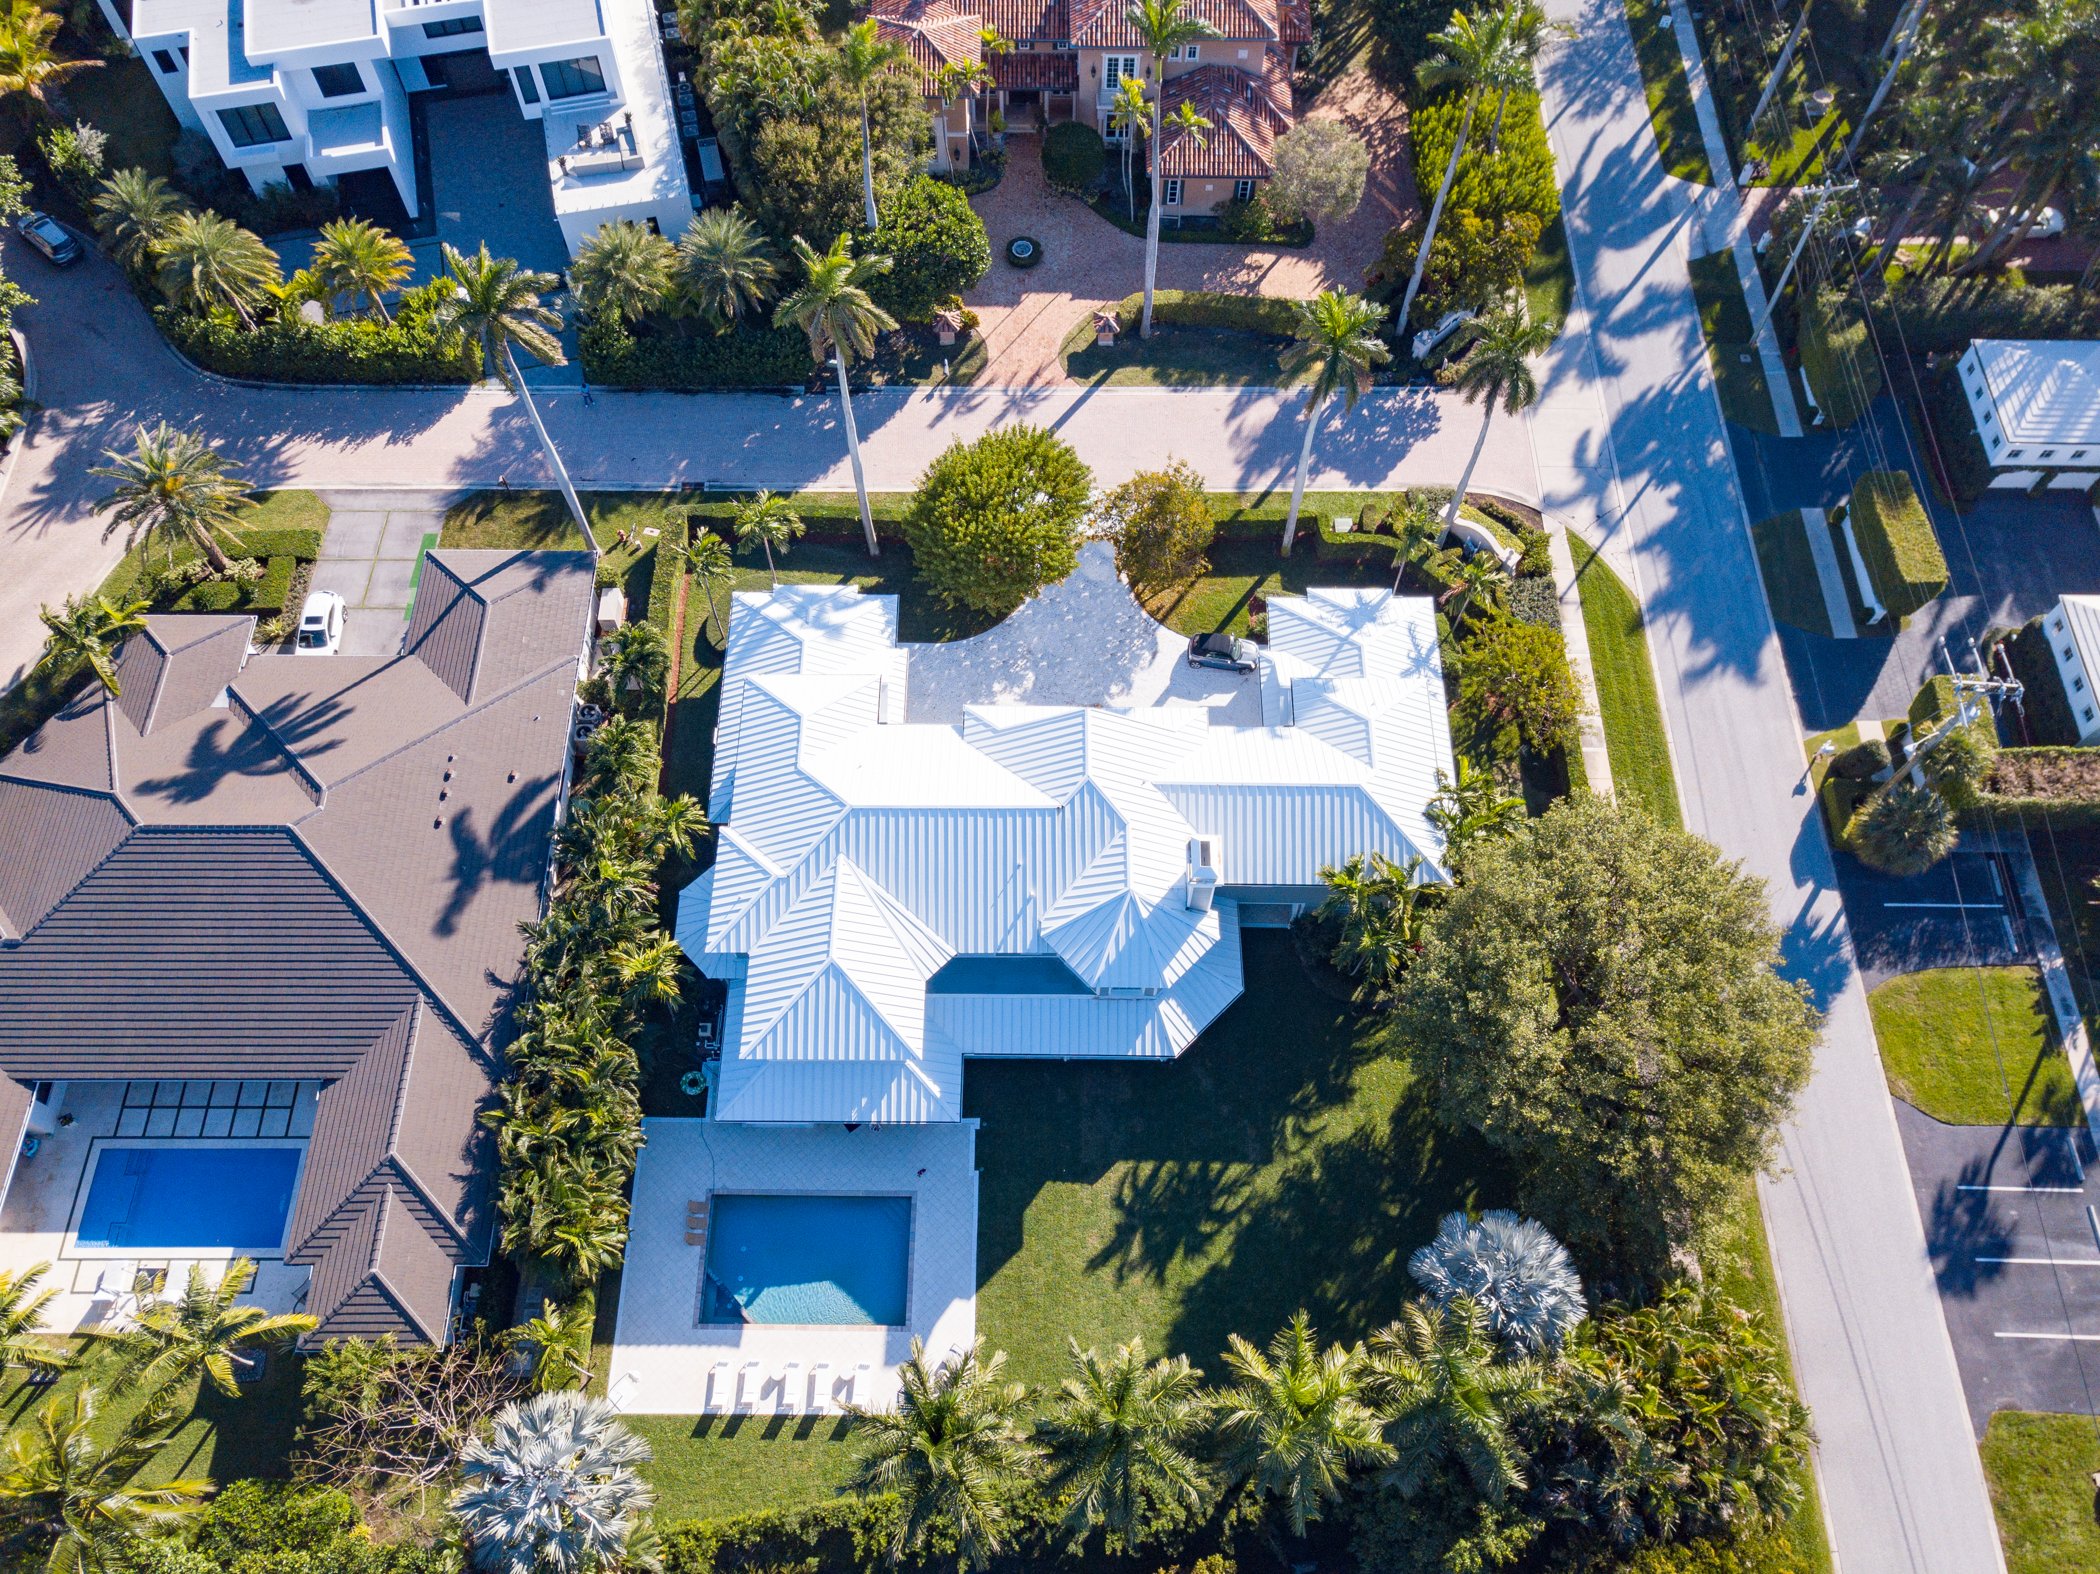 Check Out This Newly Renovated Coastal Contemporary In The Exclusive Point Manalapan Which Just Listed For $7.995 Million47.jpg